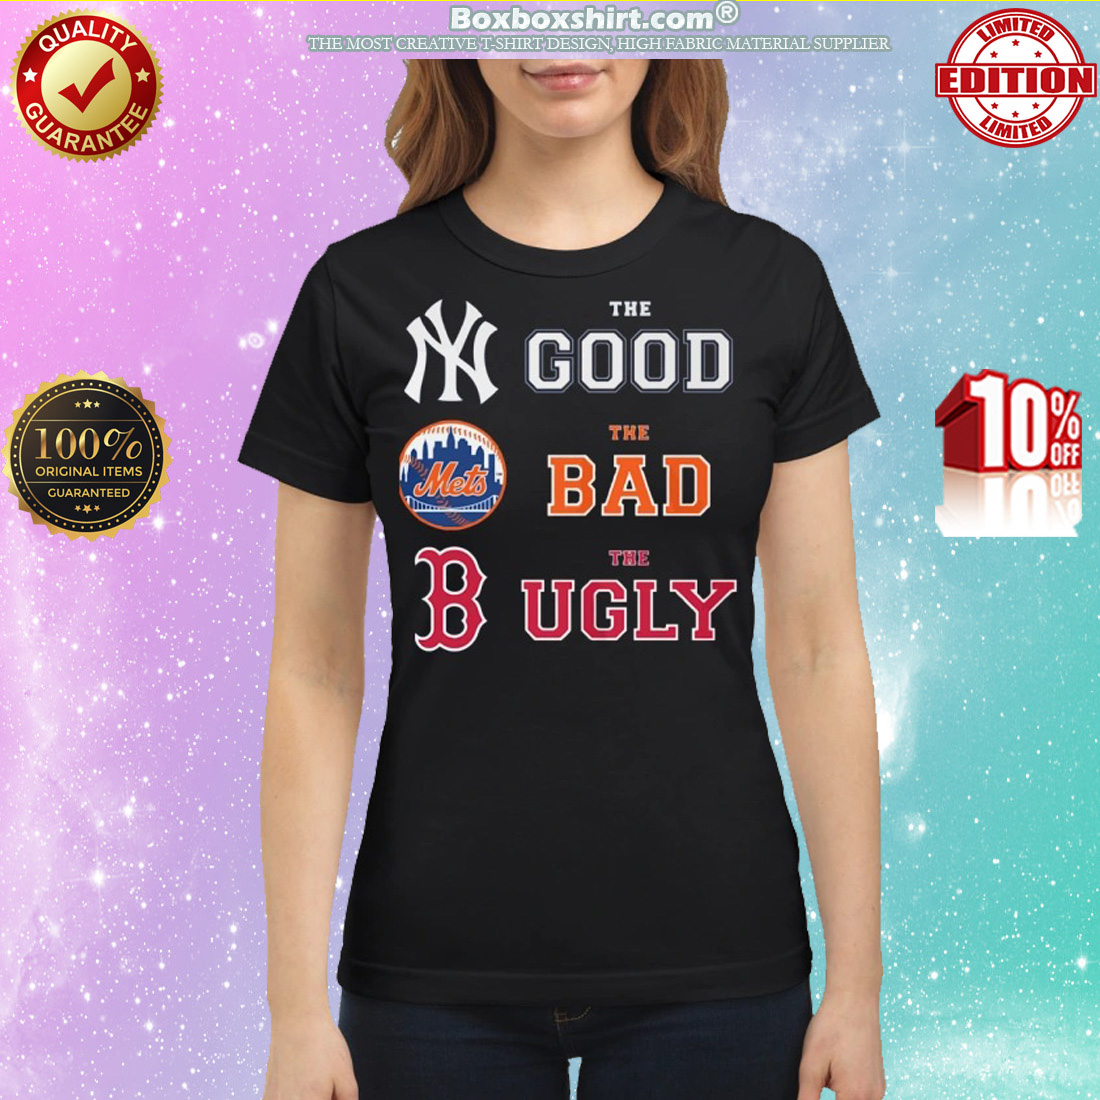 The Good New York Yankees the bad New York Mets the ugly Boston Red Sox classic shirt